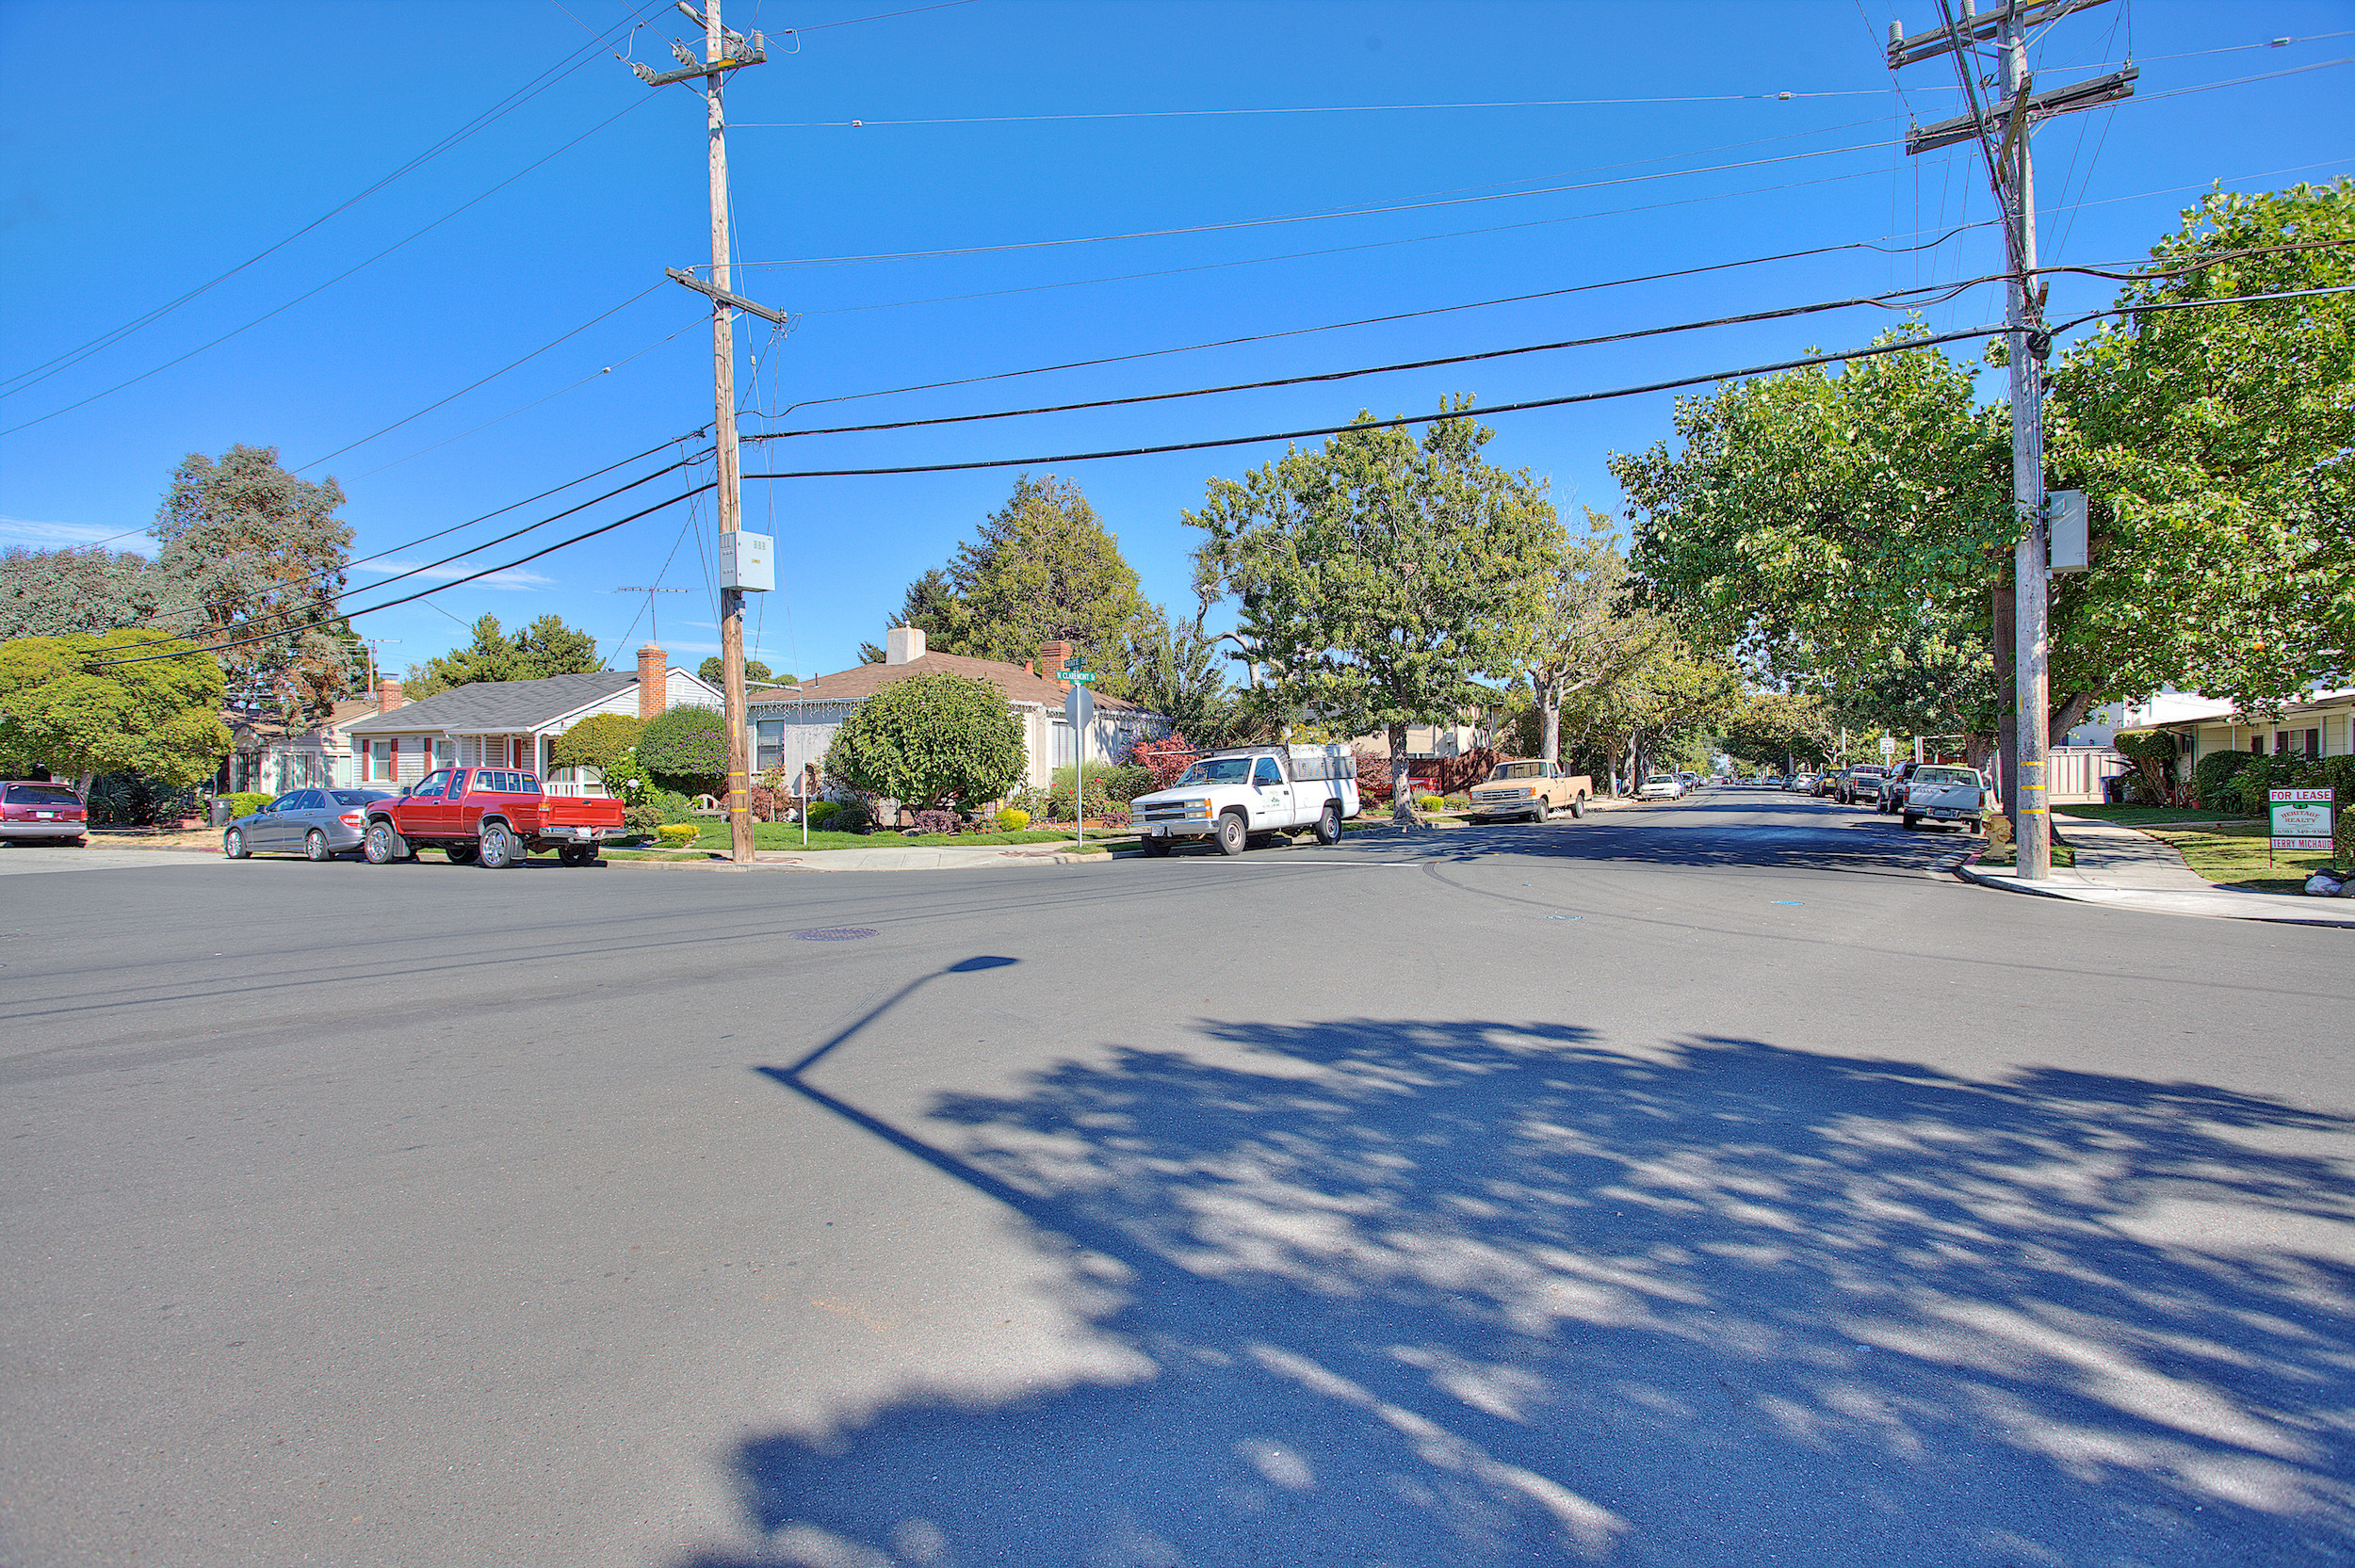 Woodlake area street with red truck in San Mateo